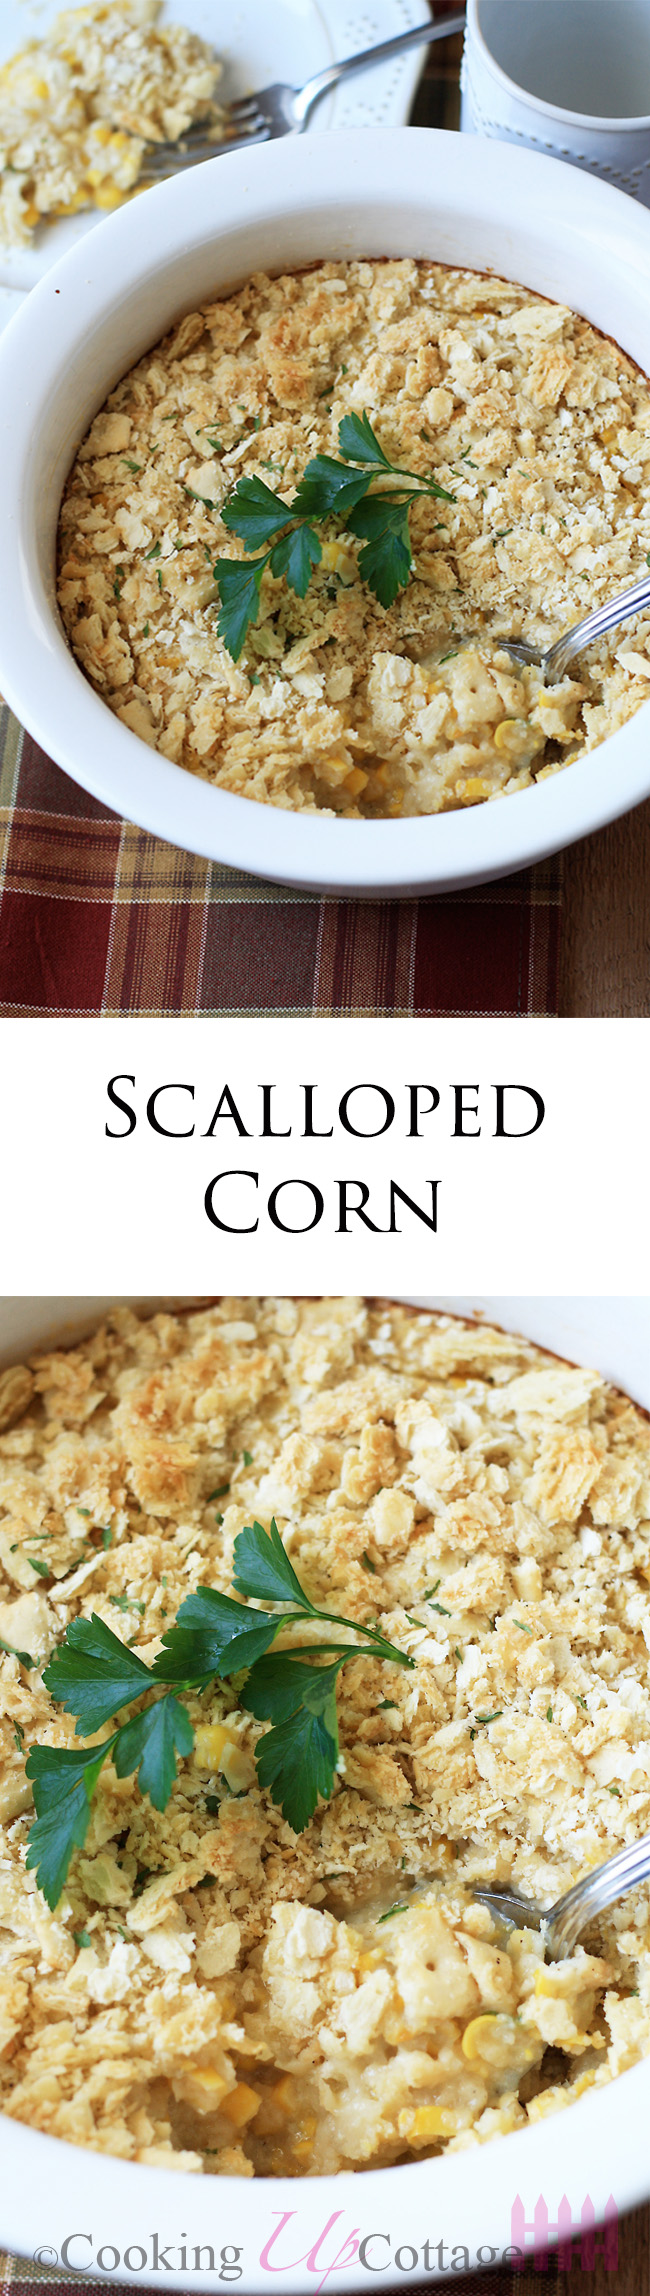 Scalloped Corn Cooking Up Cottage